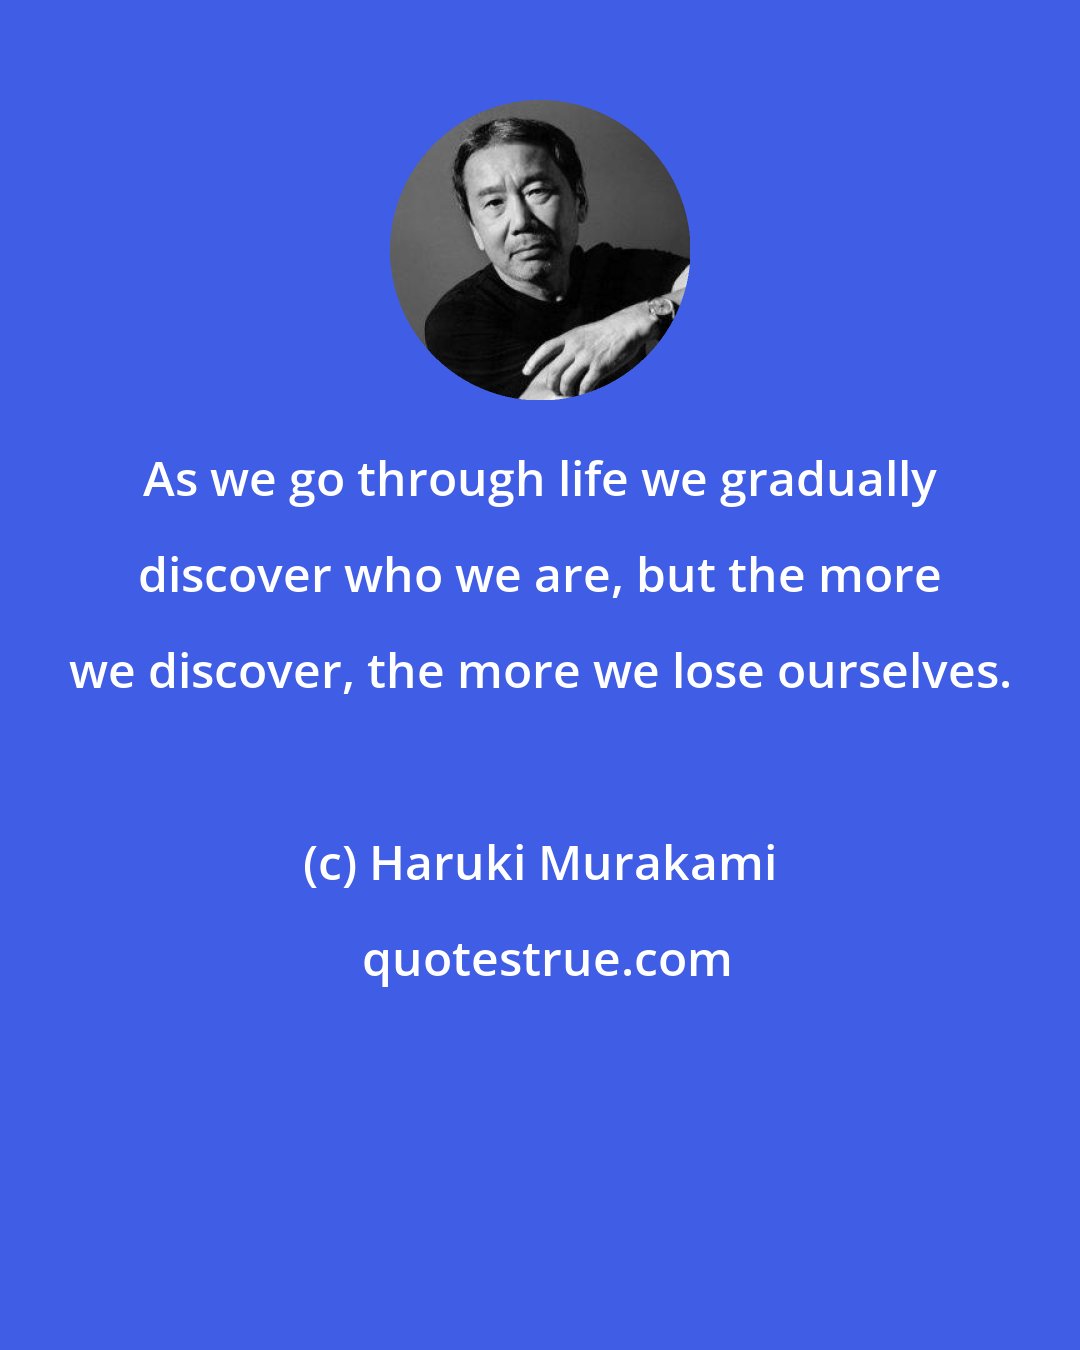 Haruki Murakami: As we go through life we gradually discover who we are, but the more we discover, the more we lose ourselves.